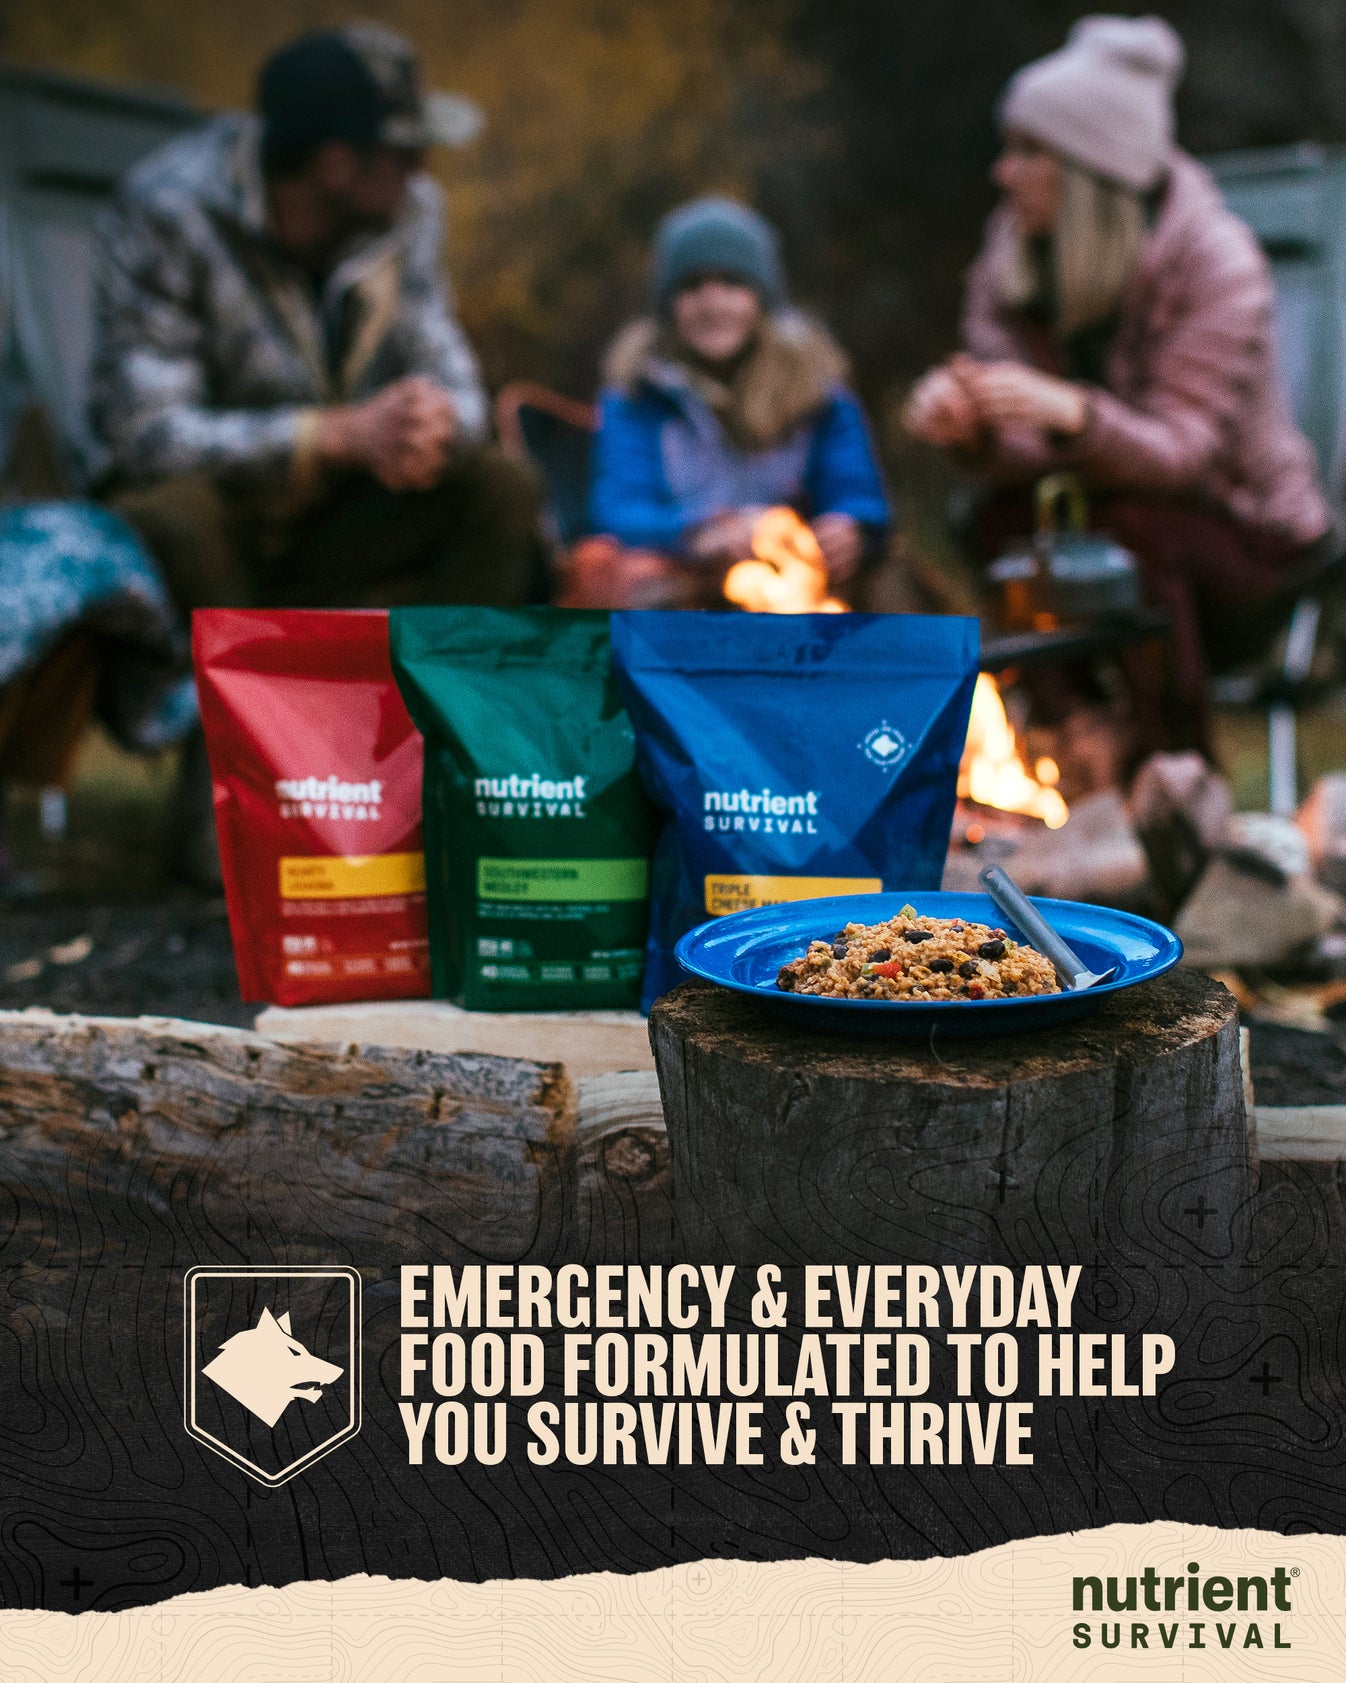 Nutrient Survival Vitamin Powdered Milk, Freeze Dried Prepper Supplies &  Emergency Food Supply, 21 Essential Nutrients, Soy & Gluten Free, Shelf  Stable Up to 25 Years, One Can, 50 Servings 